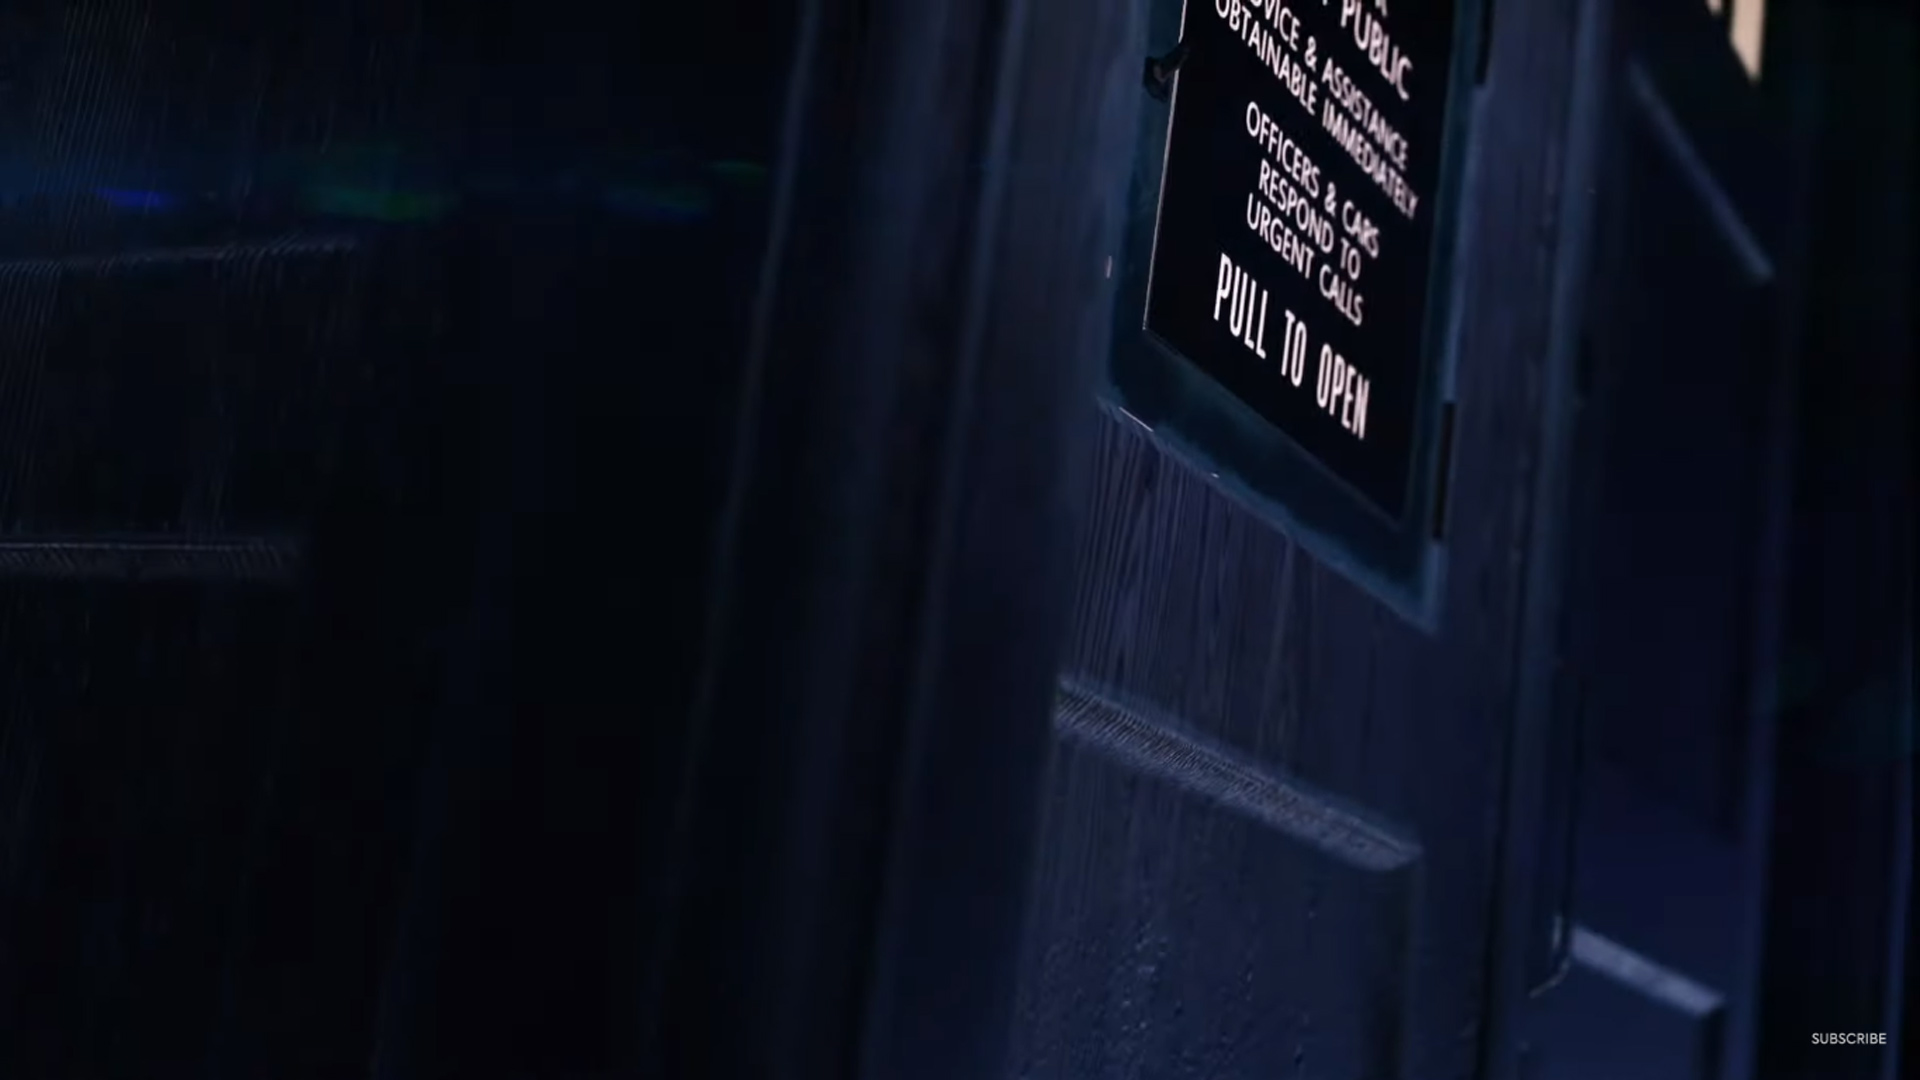 Doctor Who: The Edge of Time Trailer is out now, fans get a look inside TARDIS